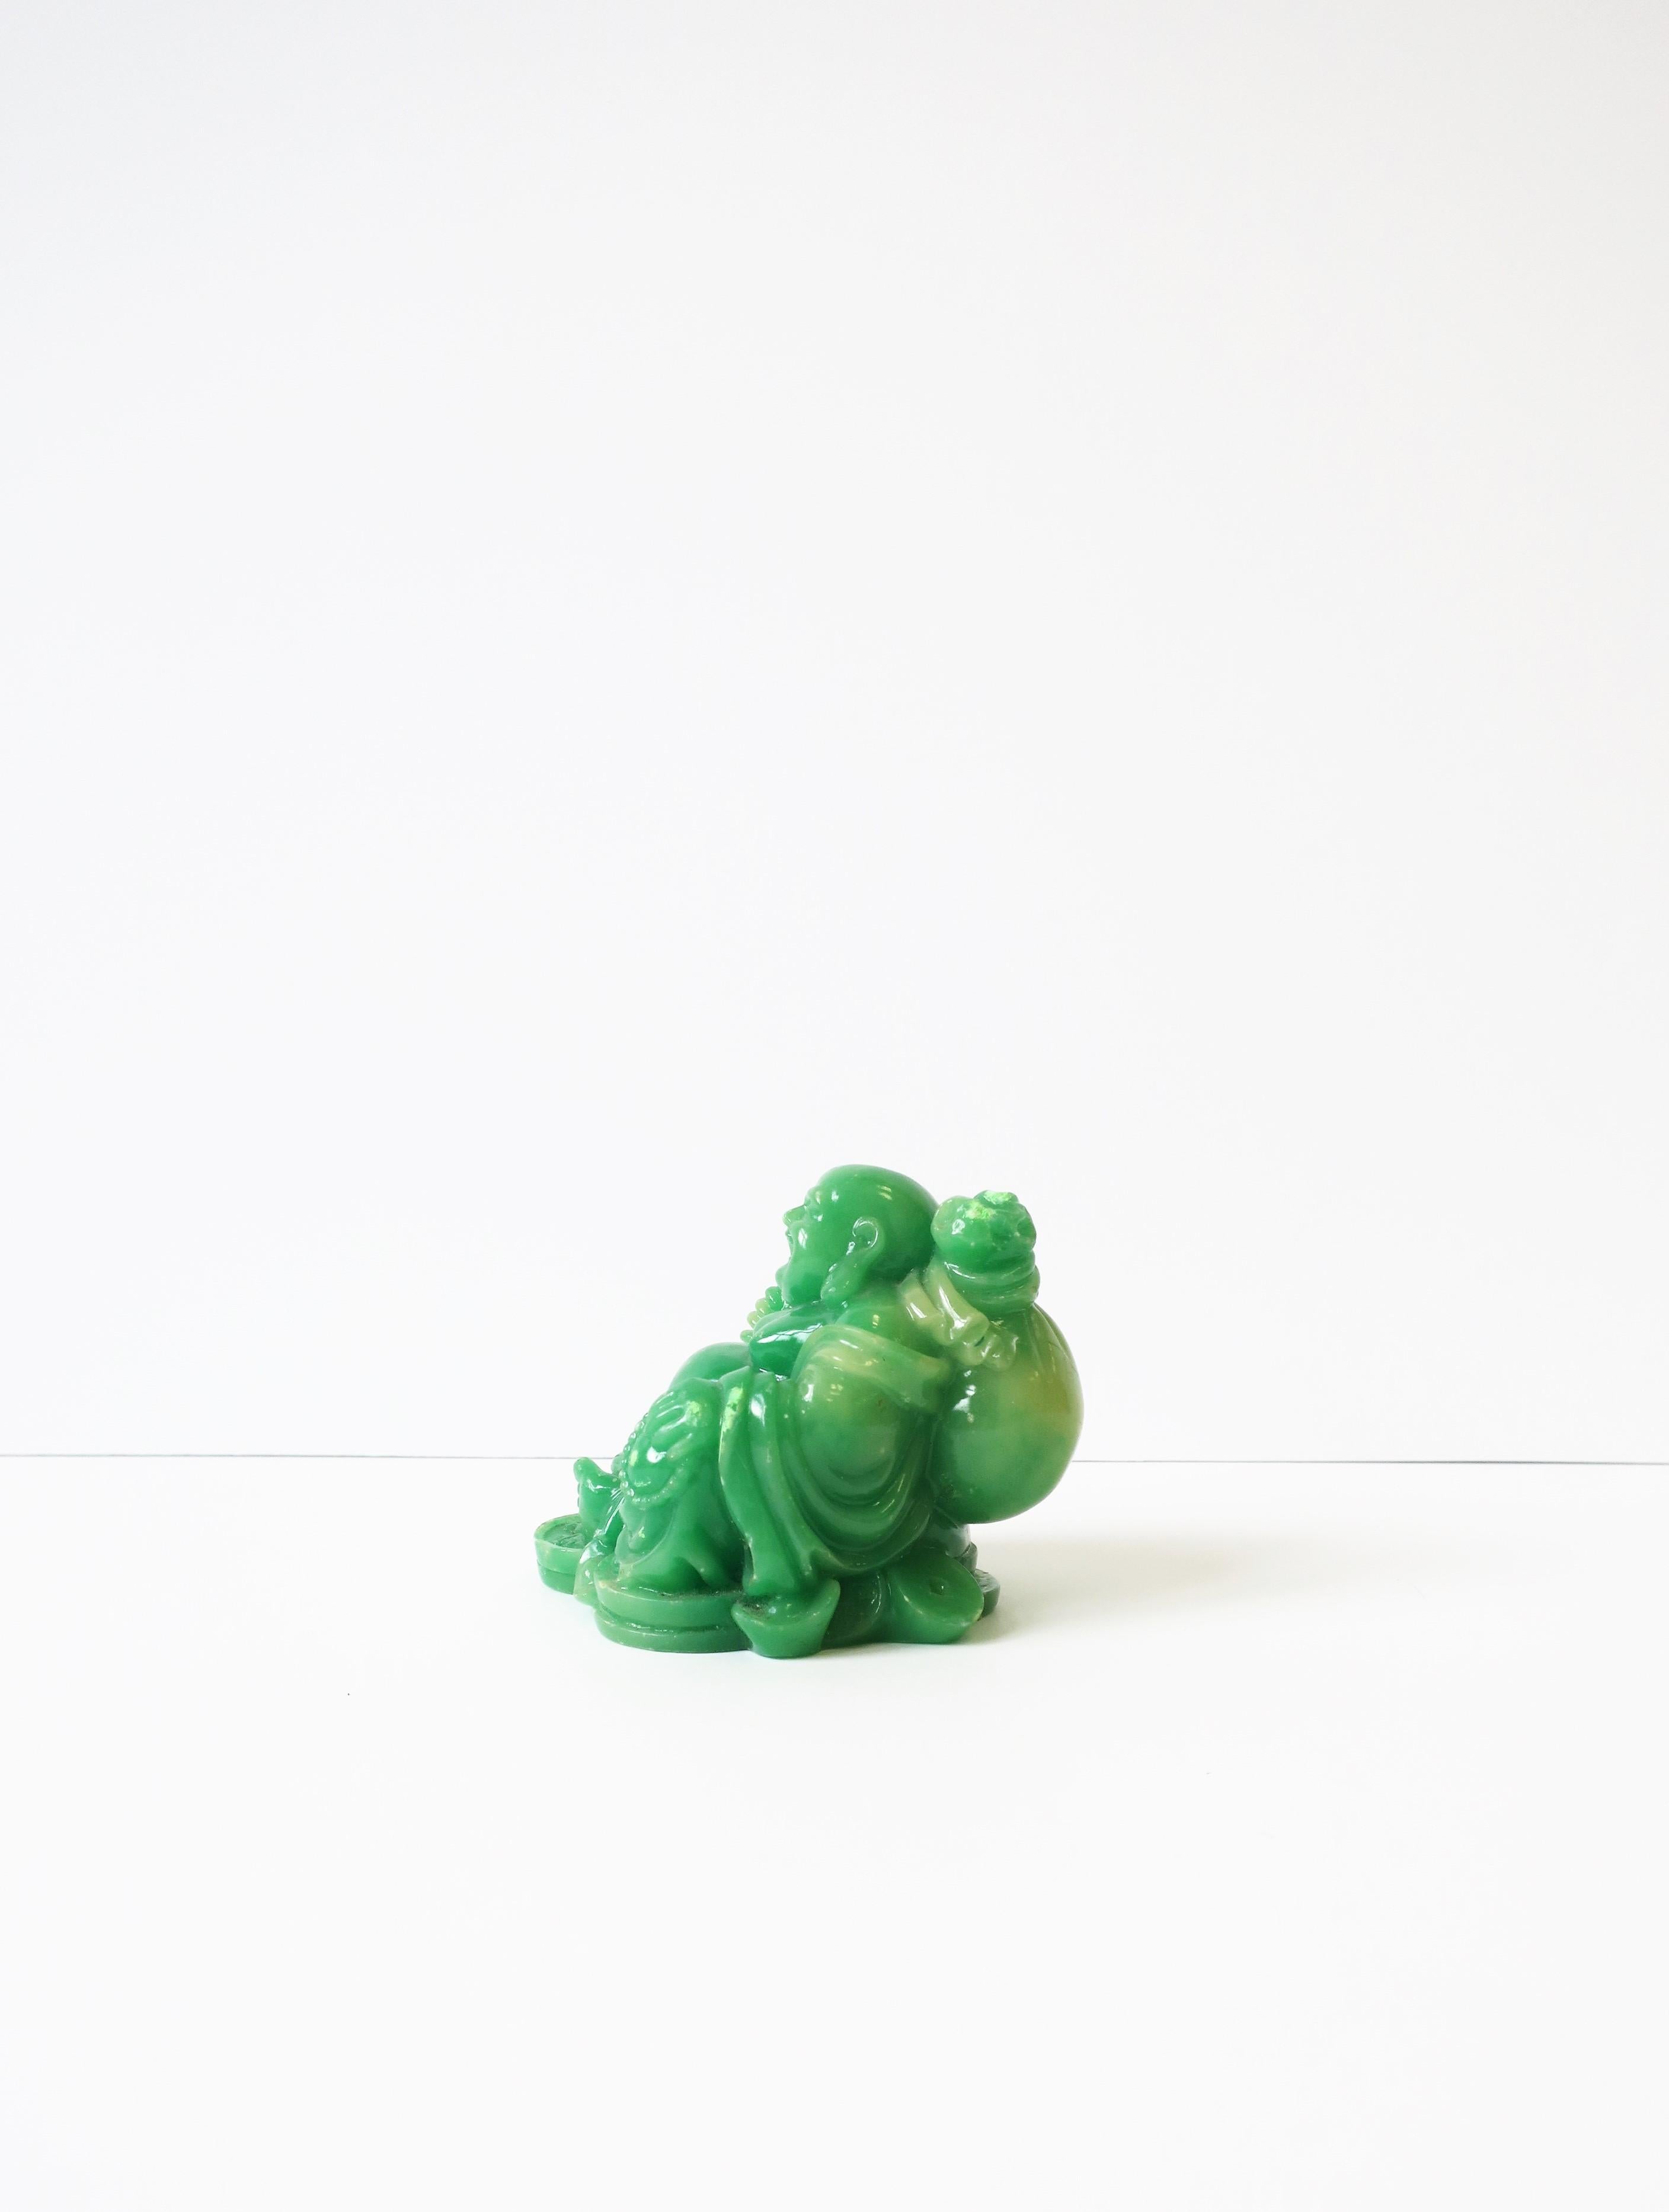 Molded Jade Green Resin Seated Buddha Sculpture For Sale